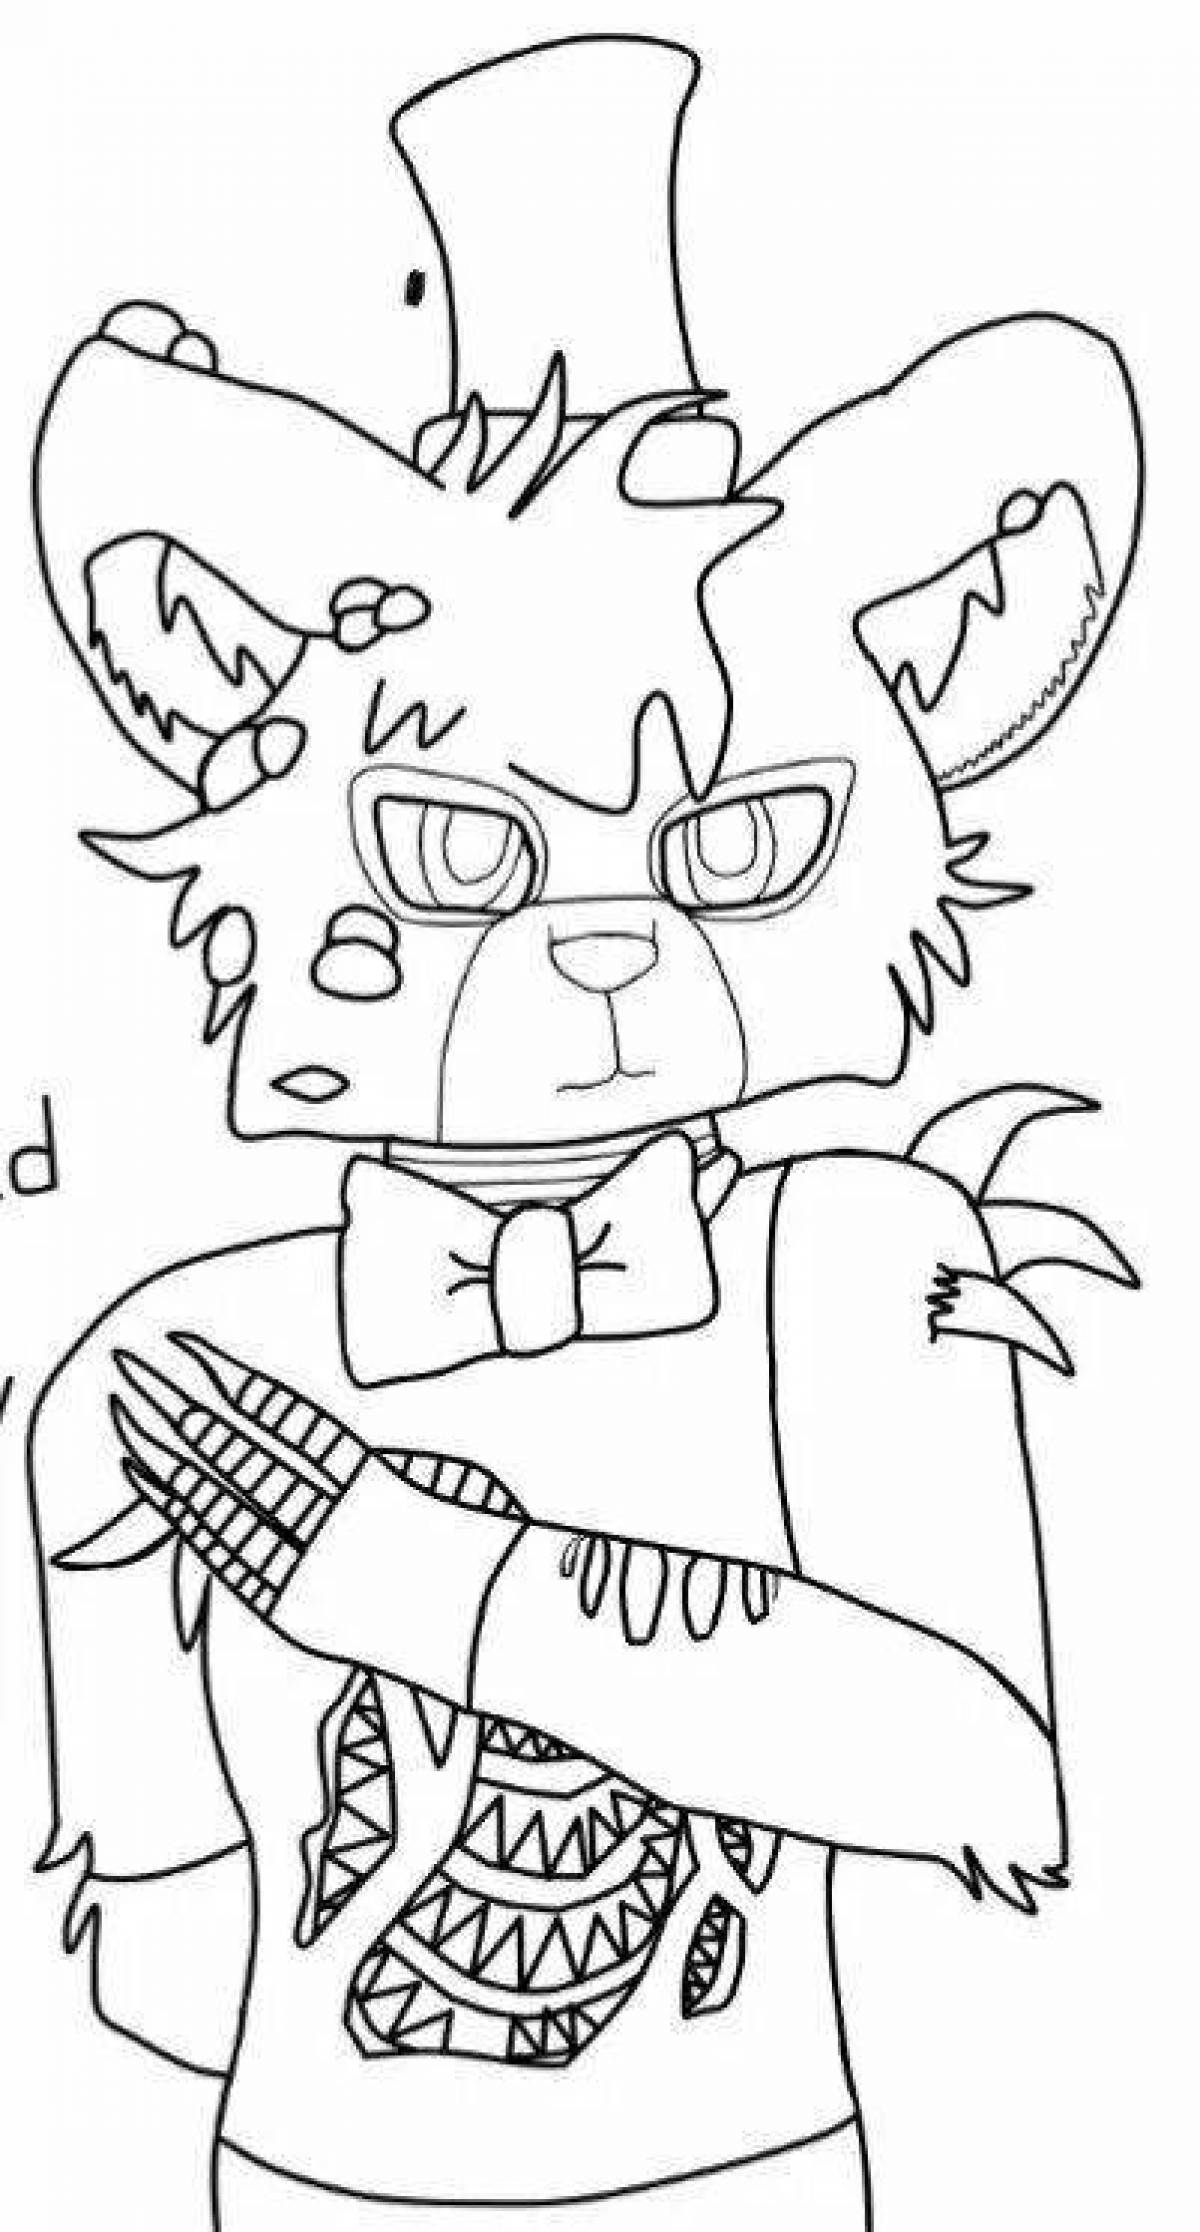 Charming animatronics twisted coloring page